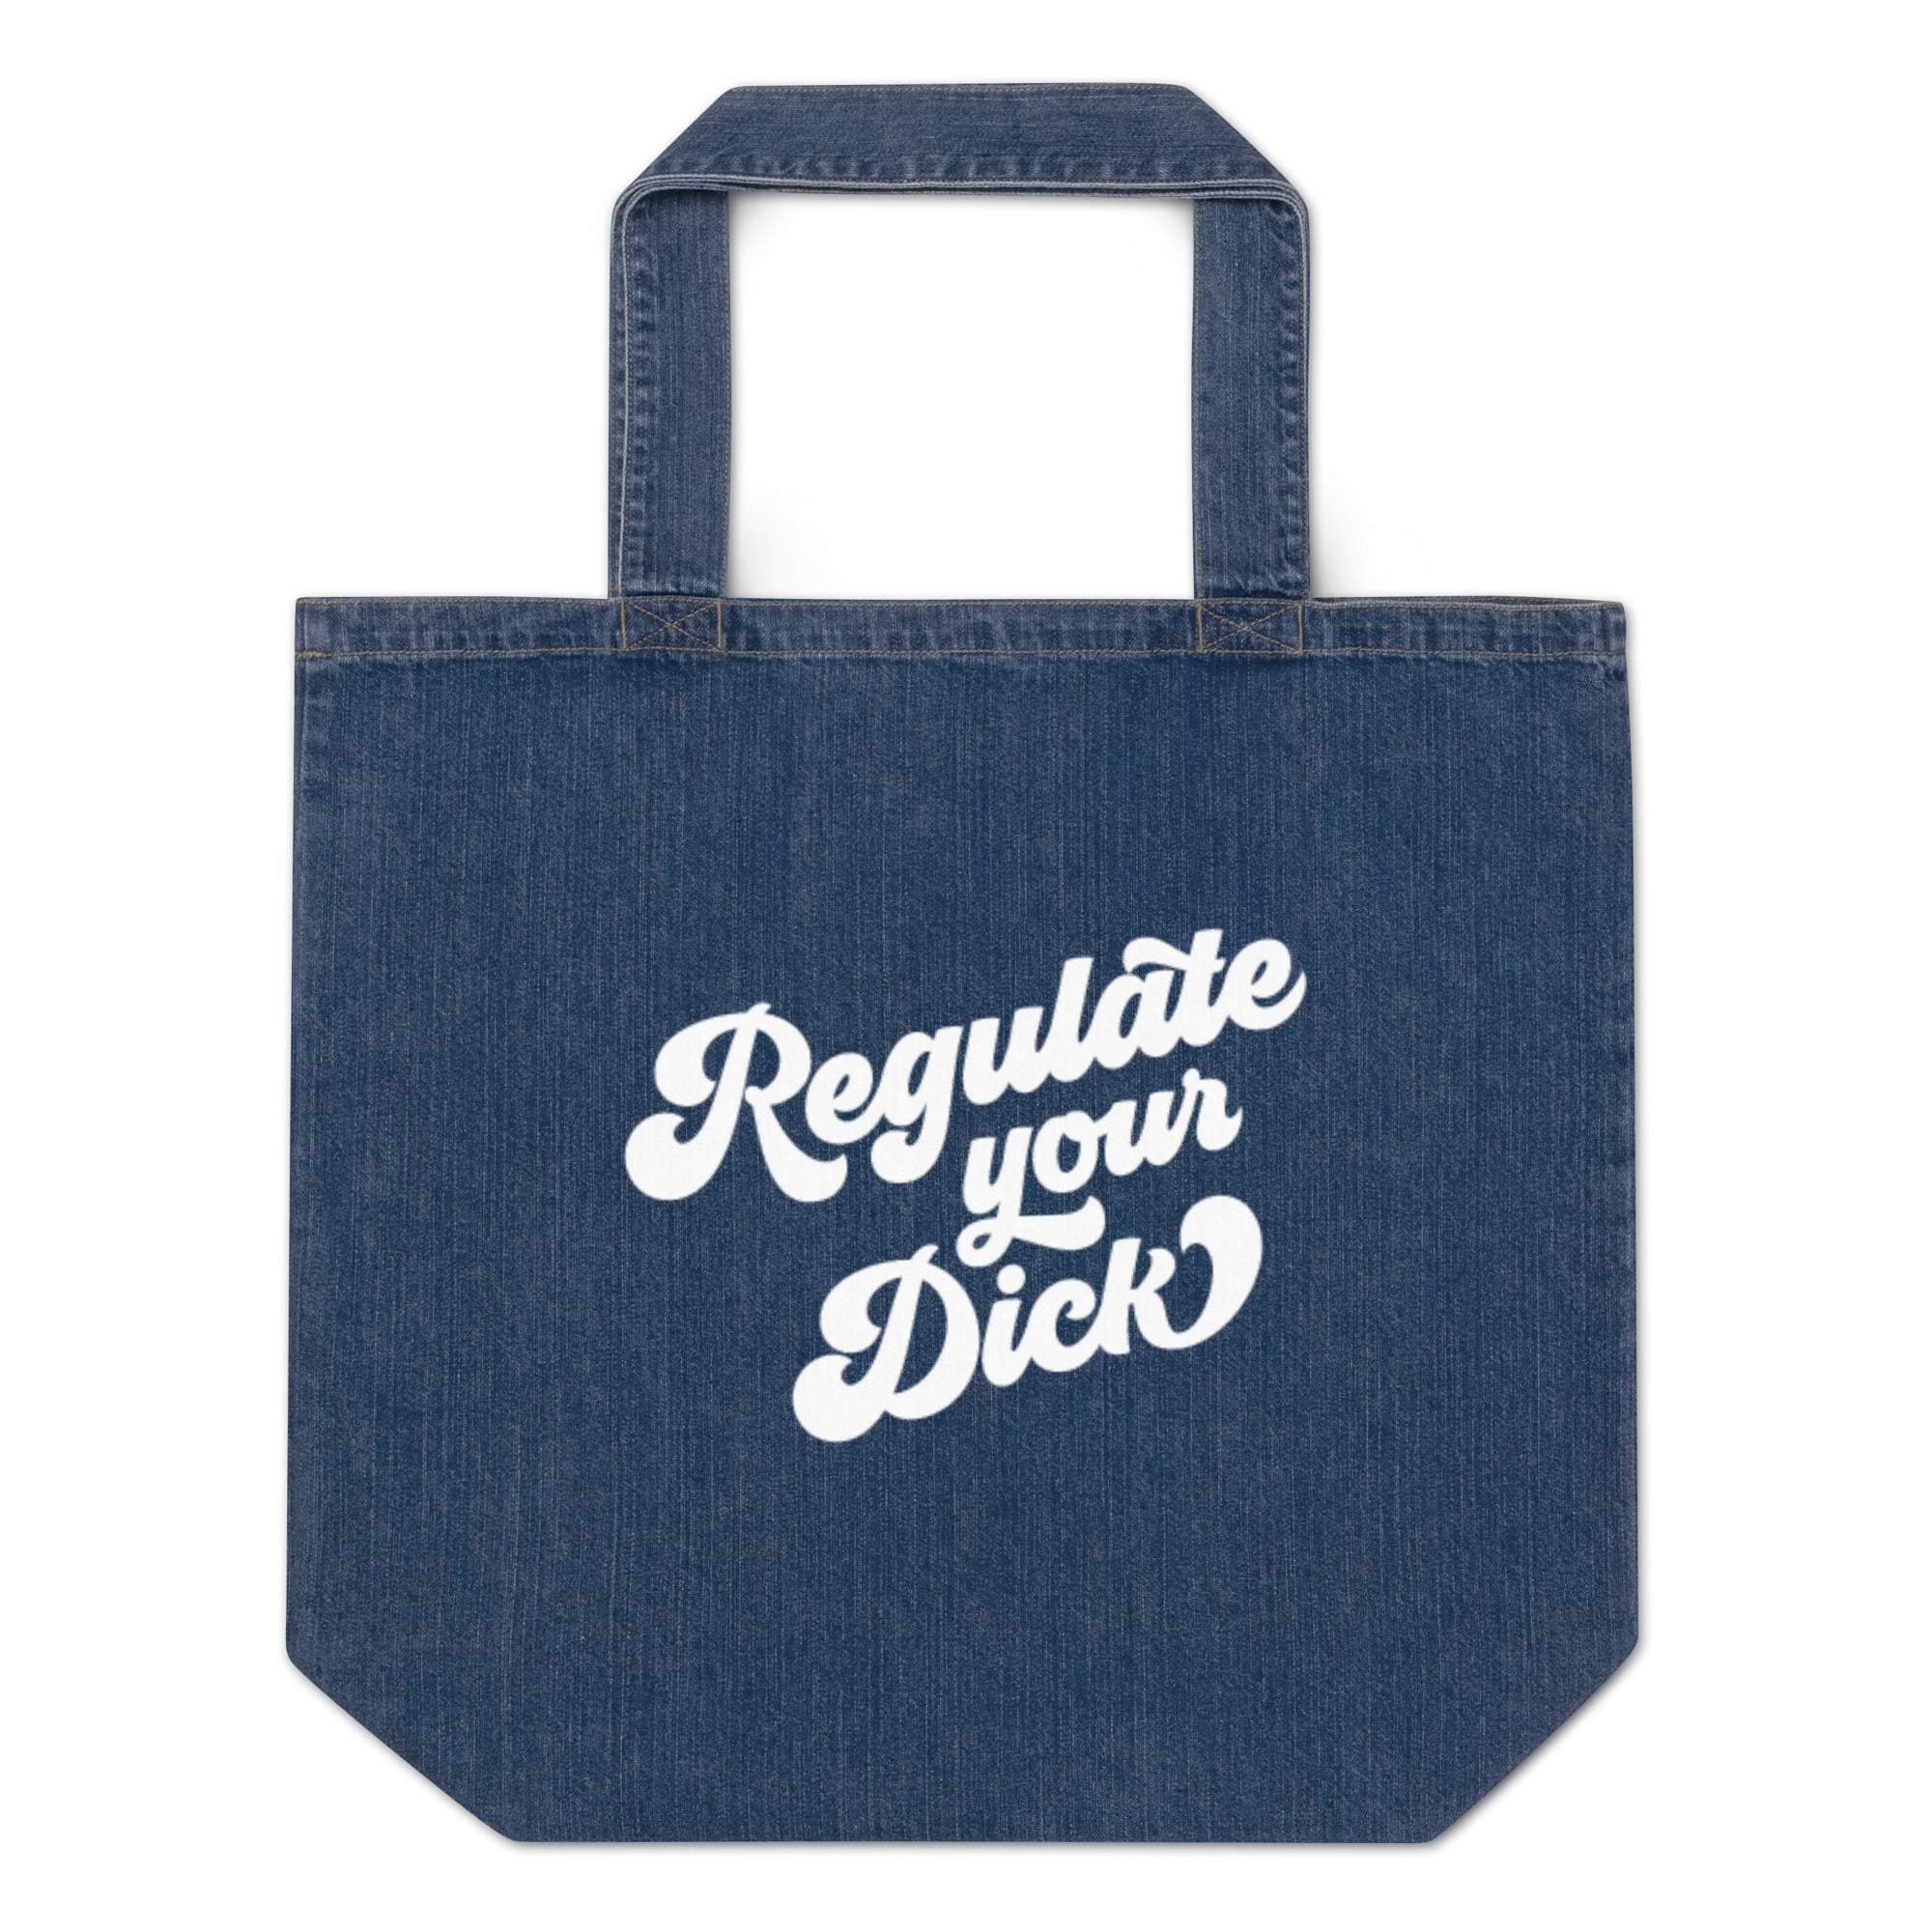 Regulate Your Dick Tote